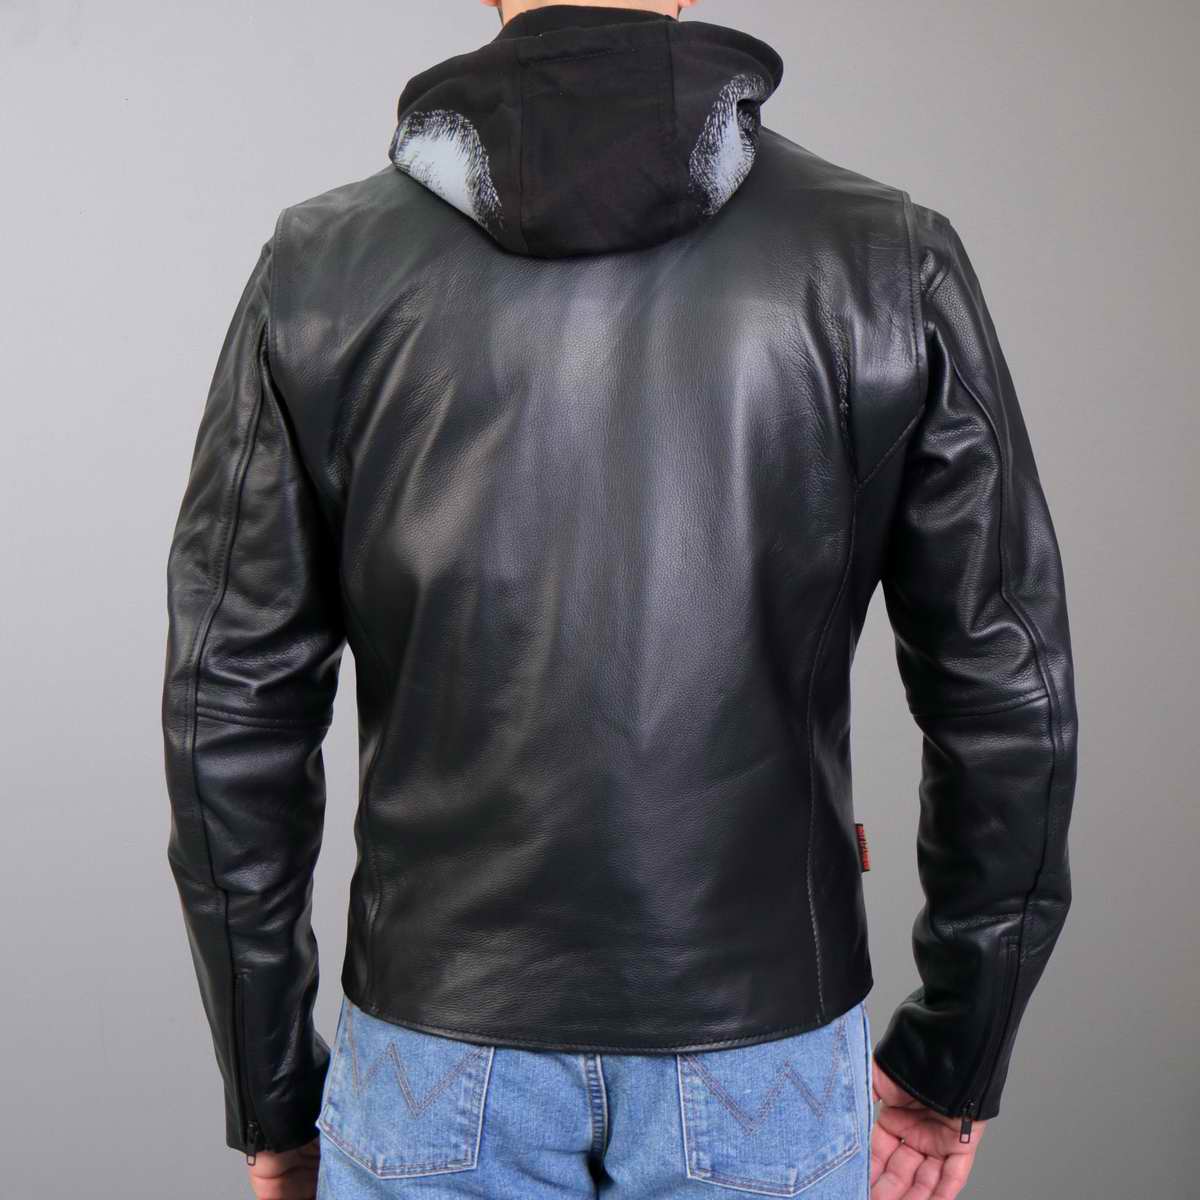 Hot Leathers JKM1031 Men’s ‘Skull and Bones’ Leather Jacket with Flannel Lining